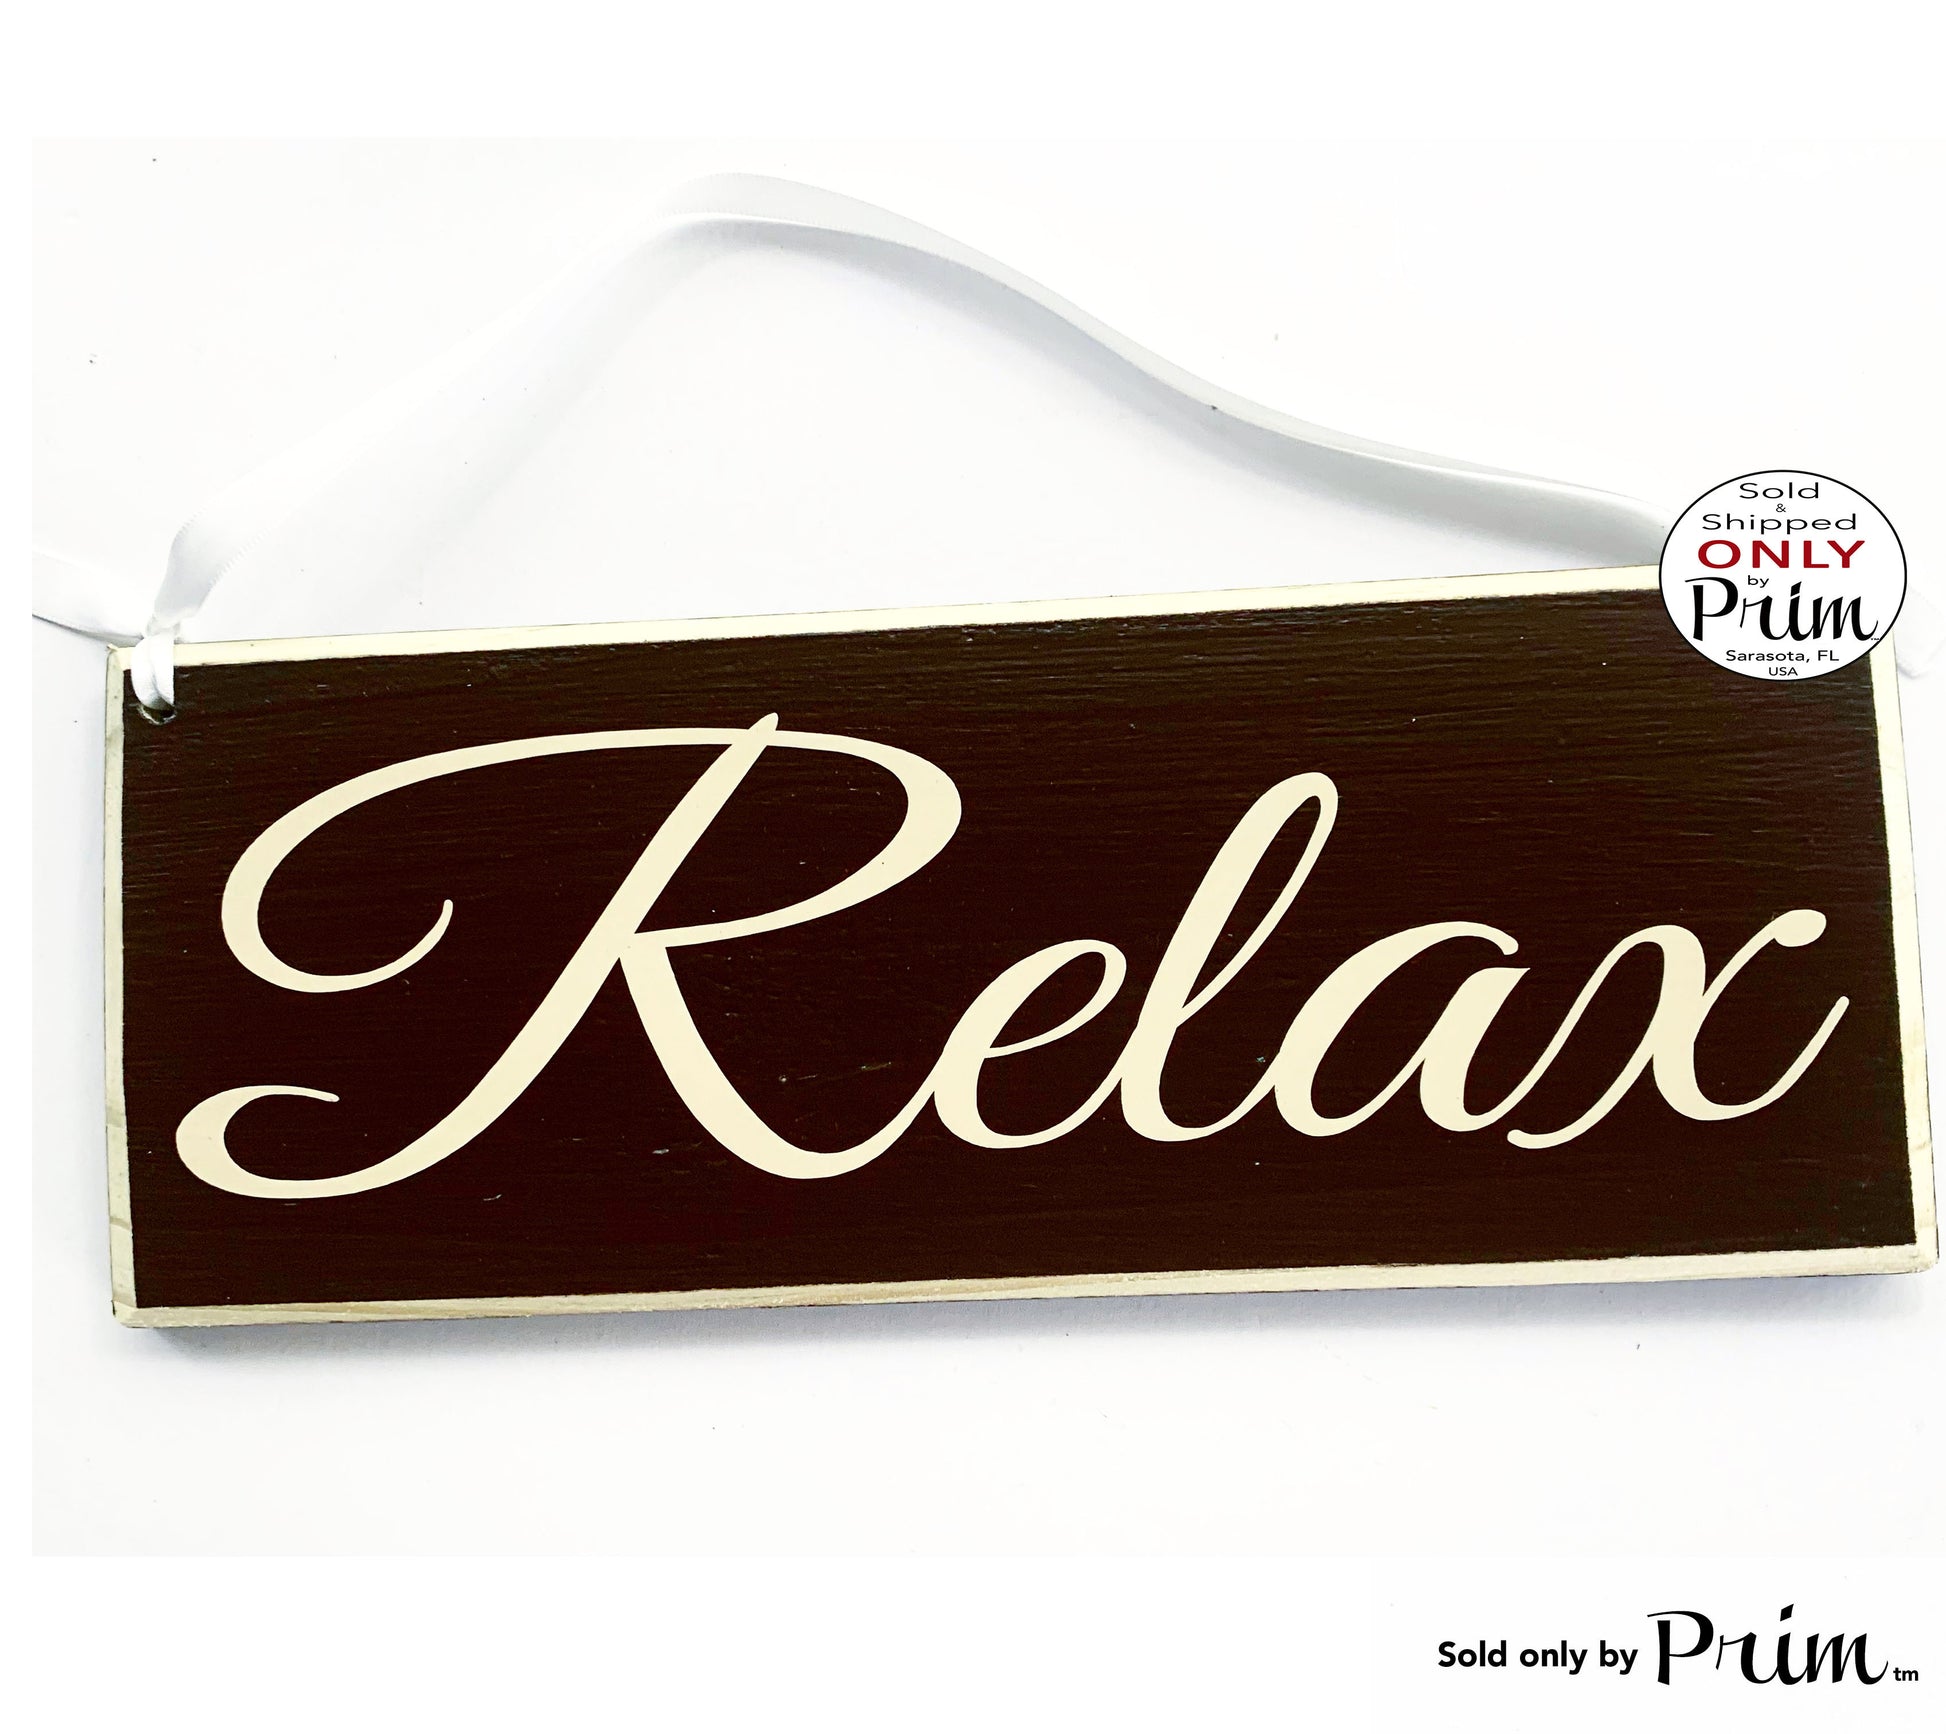 10x4 Relax Custom Wood Sign Refresh Renew Spa Relaxation Lounge Tranquility Massage Office Salon Quiet Please Soft Voices Shhh Plaques Designs by Prim